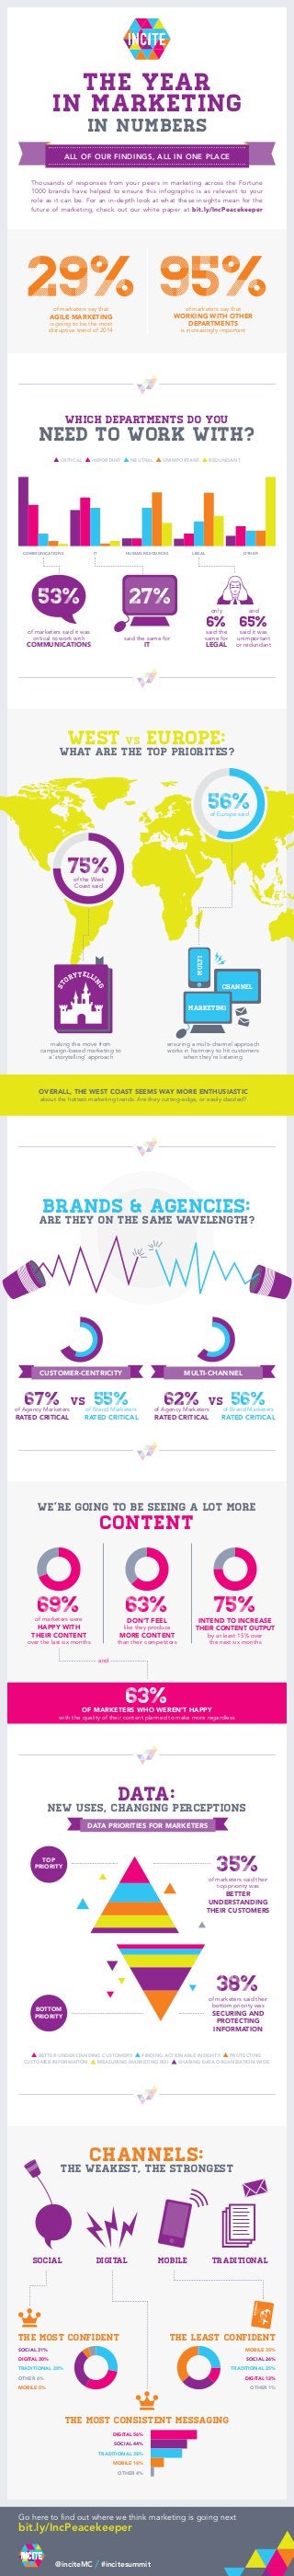 The year 
in marketing 
in numbers 
All of our findings, all in one place 
Thousands of responses from your peers in marketing across the Fortune 
1000 brands have helped to ensure this infographic is as relevant to your 
role as it can be. For an in-depth look at what these insights mean for the 
future of marketing, check out our white paper at bit.ly/IncPeacekeeper 
53% 27% 
west vs europe: 
What are the top priorites? 
75% 
of the West 
Coast said 
storytelling 
multi 
56% 
of Europe said 
Brands & Agencies: 
Are They On the Same Wavelength? 
vs 62% of Agency Marketers 
and 
channels: 
only and 
35% 
of marketers said their 
top priority was 
better 
understanding 
their customers 
38% 
of marketers said their 
bottom priority was 
securing and 
protecting 
information 
priority 
bottom 
priority 
the weakest, the strongest 
digital 
top 
social mobile traditional 
the most confident 
the least confident 
the most consistent messaging 
social 31% 
digital 30% 
traditional 28% 
other 6% 
mobile 5% 
mobile 35% 
social 26% 
traditional 25% 
digital 12% 
other 1% 
digital 56% 
social 44% 
traditional 38% 
mobile 16% 
other 4% 
of marketers say that 
working with other 
departments 
is increasingly important 
of marketers say that 
agile marketing 
is going to be the most 
disruptive trend of 2014 
Which departments do you 
need to work with? 
critical important neutral unimportant redundant 
Communications it human resources legal other 
of marketers said it was 
critical to work with 
Communications 
6% 
said the 
same for 
Legal 
65% 
said it was 
unimportant 
or redundant 
said the same for 
IT 
Customer-Centricity multi-channel 
67% of Agency Marketers 
rated CRITICAL 
55% of Brand Marketers 
rated CRITICAL 
rated CRITICAL 
56% of Brand Marketers 
rated CRITICAL 
vs 
we’re going to be seeing a lot more 
content 
63% 
don’t feel 
like they produce 
more content 
than their competitors 
75% 
intend to increase 
their content output 
by at least 15% over 
the next six months 
69% 
of marketers were 
happy with 
their content 
over the last six months 
63% 
of marketers who weren’t happy 
with the quality of their content planned to make more regardless 
data: 
new uses, changing perceptions 
data priorities for marketers 
BETER UNDERSTAnding customers finding actionable insights protecting 
customer information measuring marketing roi sharing data organization-wide 
Go here to find out where we think marketing is going next 
bit.ly/IncPeacekeeper 
@inciteMC #incitesummit 
channel 
marketing 
making the move from 
campaign-based marketing to 
a ‘storytelling’ approach 
ensuring a multi-channel approach 
works in harmony to hit customers 
when they’re listening 
Overall, the West Coast seems way more enthusiastic 
about the hottest marketing trends. Are they cutting-edge, or easily dazzled? 
